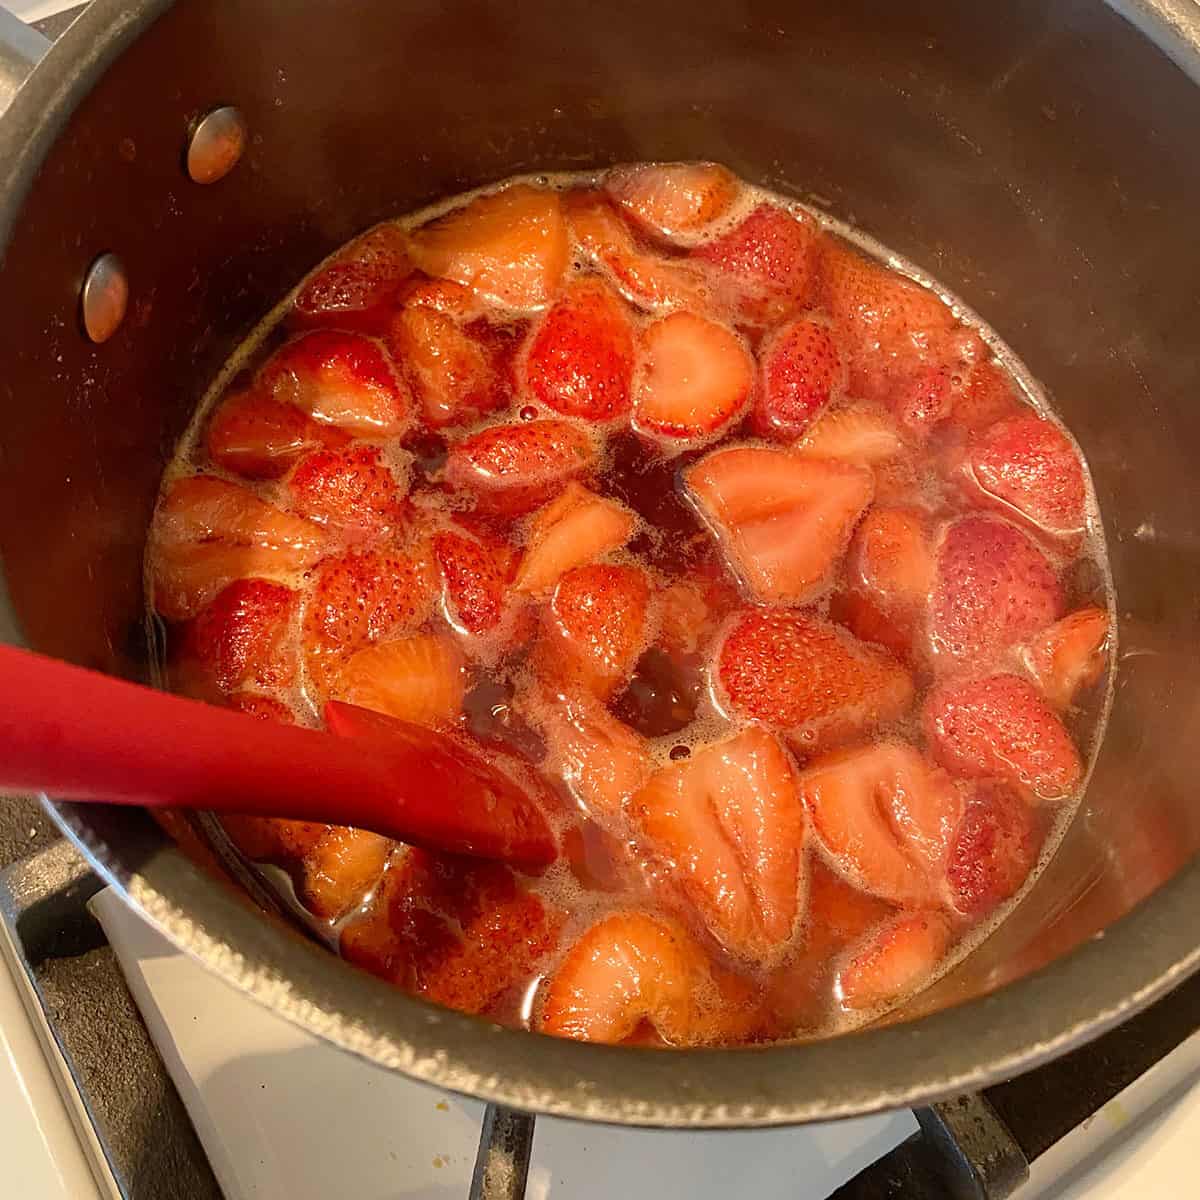 Strawberries in a pot with sweetener and water